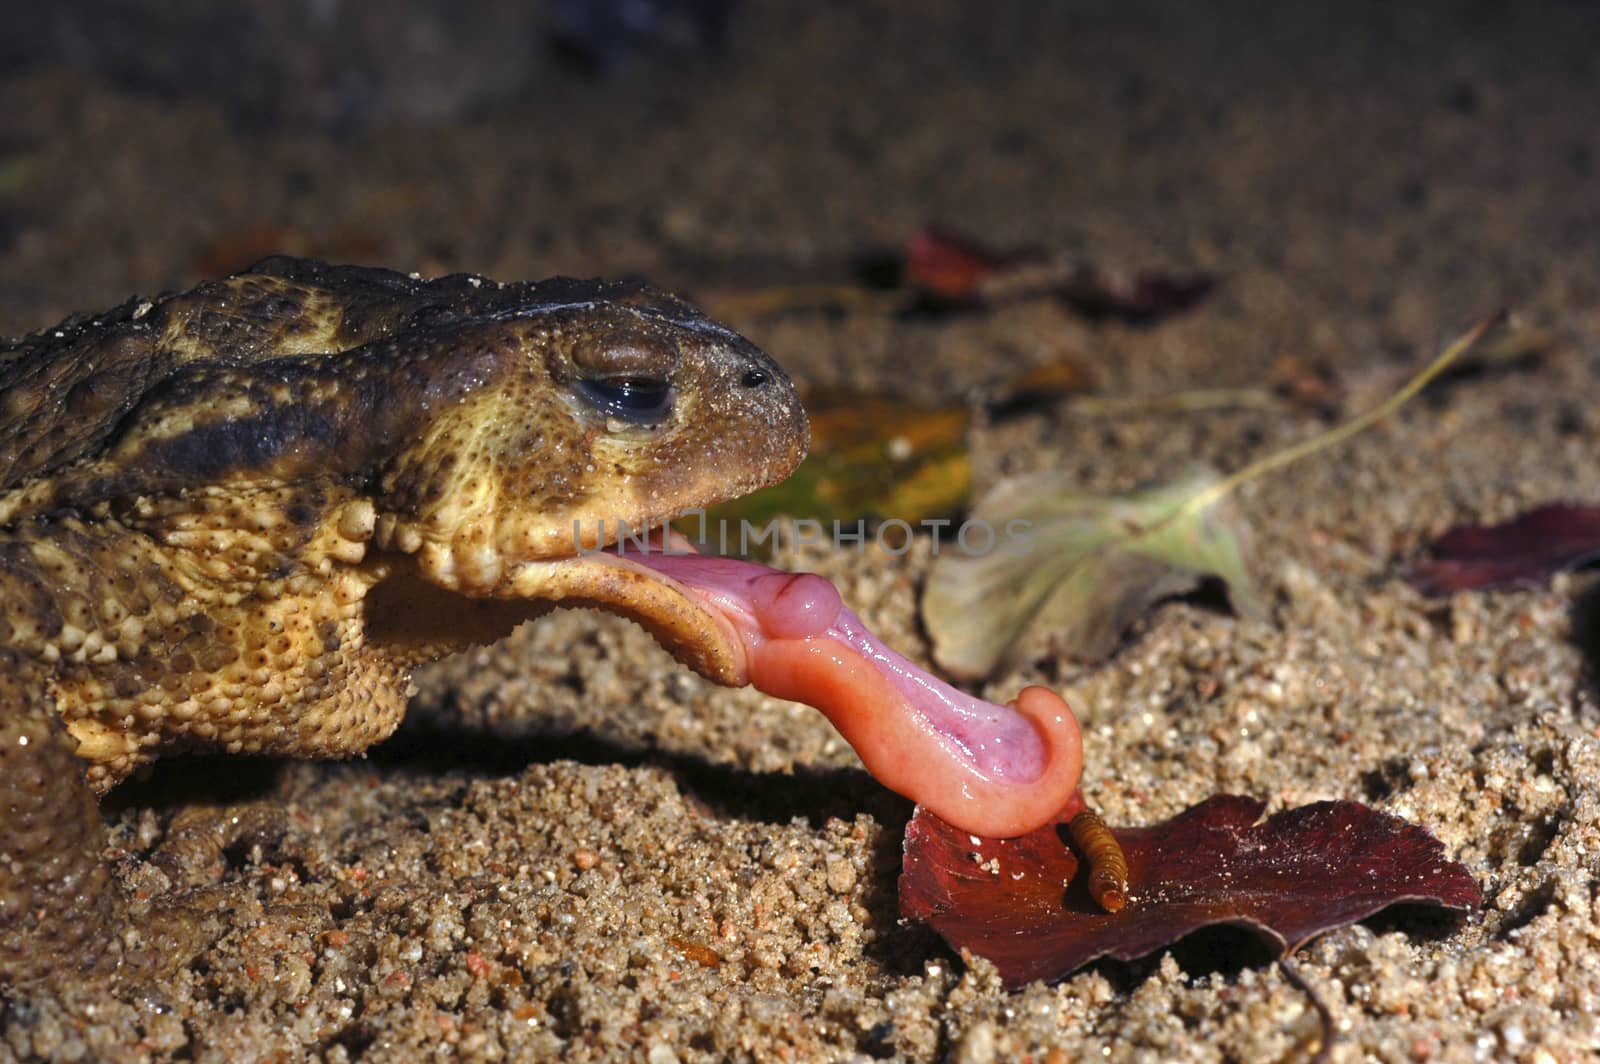 common toad, bufo bufo, Eating a worm, tongue out by jalonsohu@gmail.com